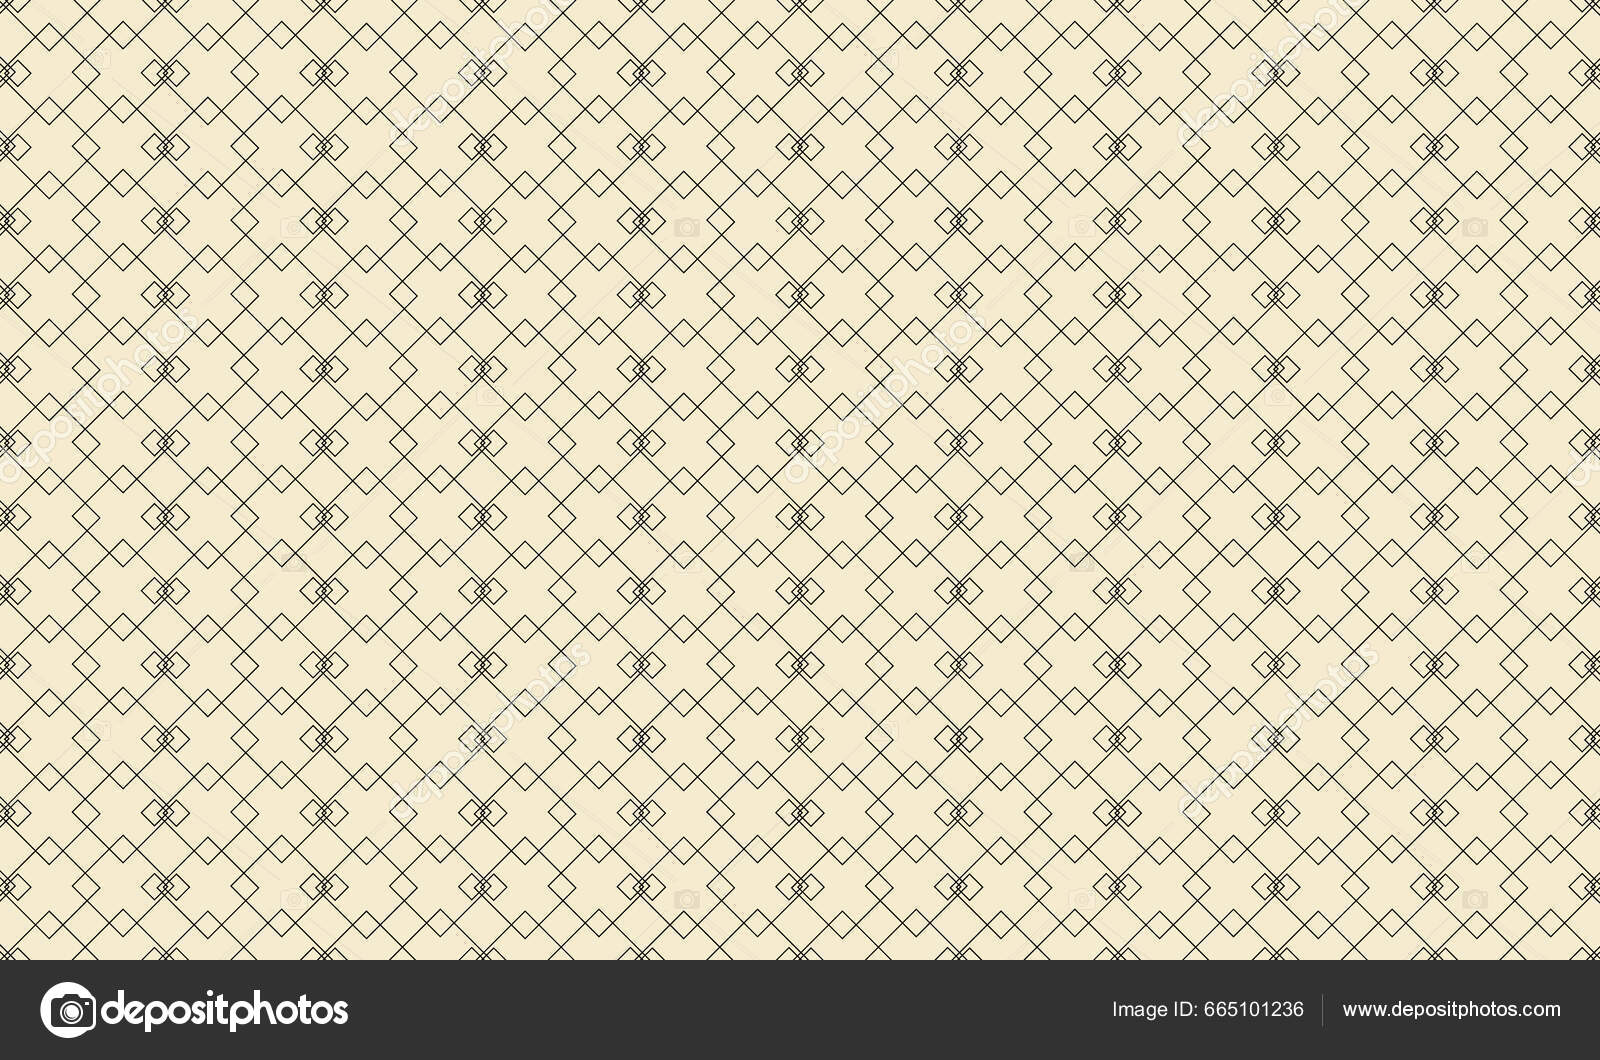 New LV Metallic Texture Wallpaper - Free Download by